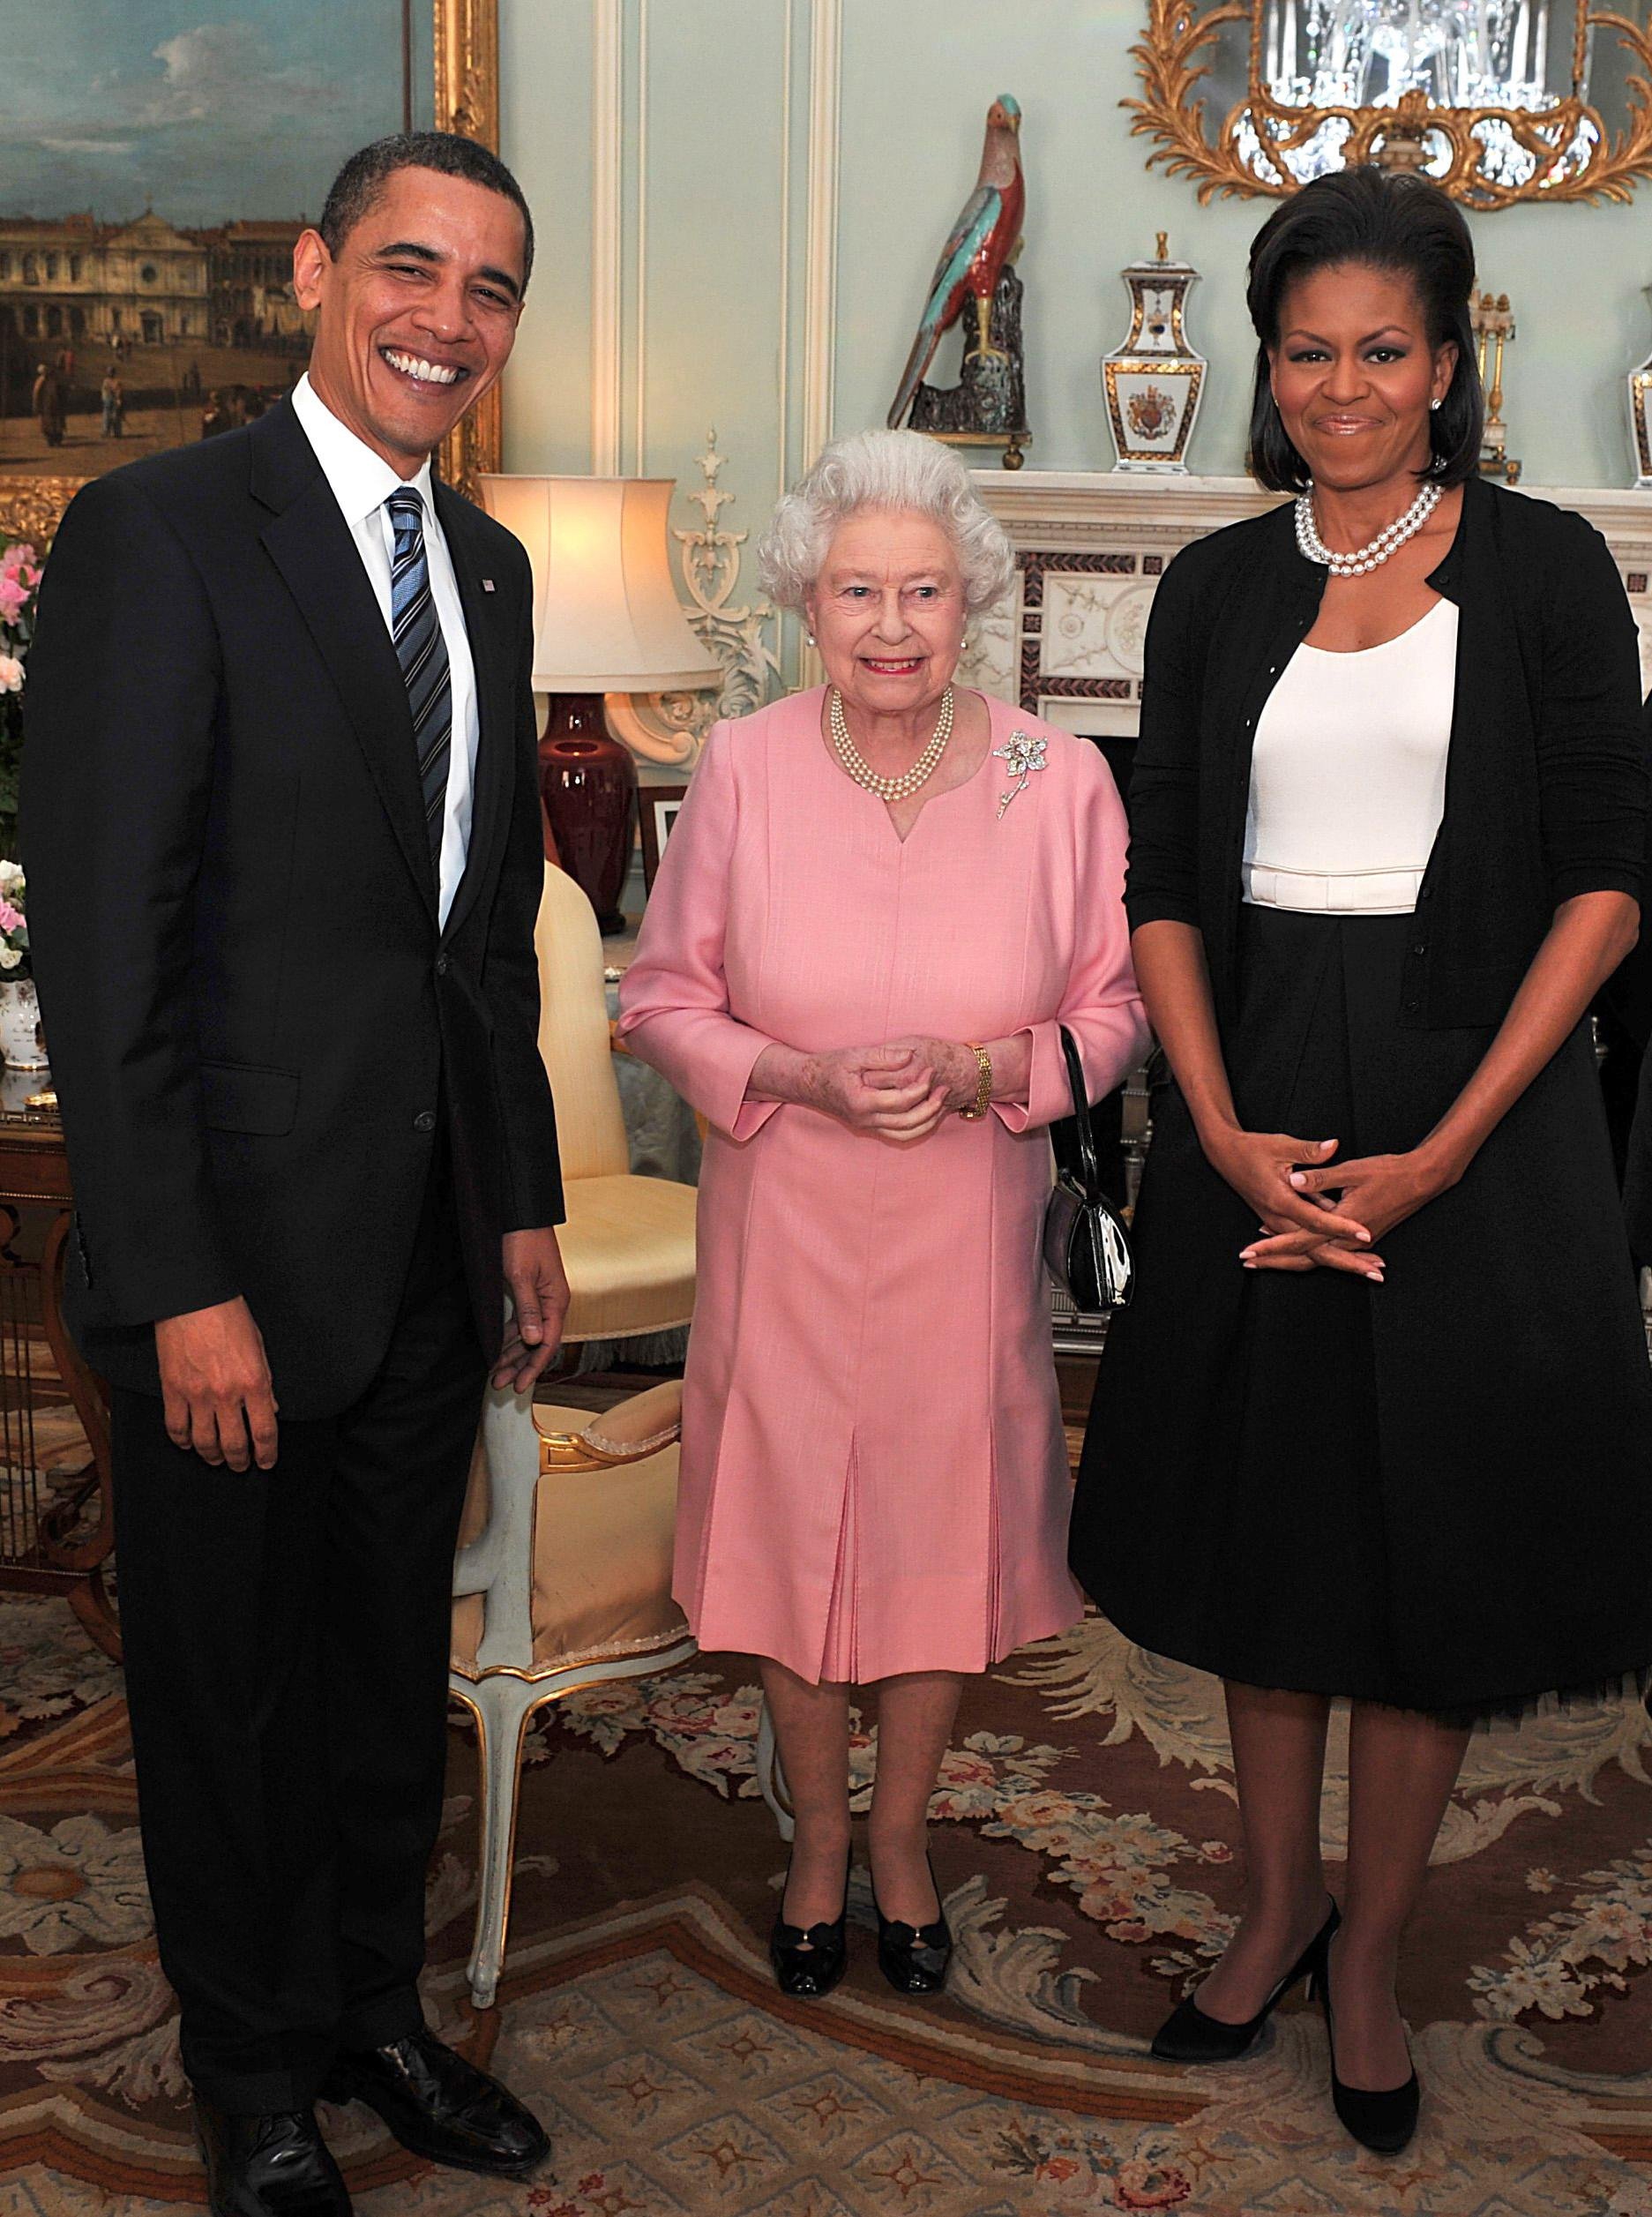 Michelle Obama, Barack Obama, and Queen Elizabeth II in 2009. | Source: Getty Images